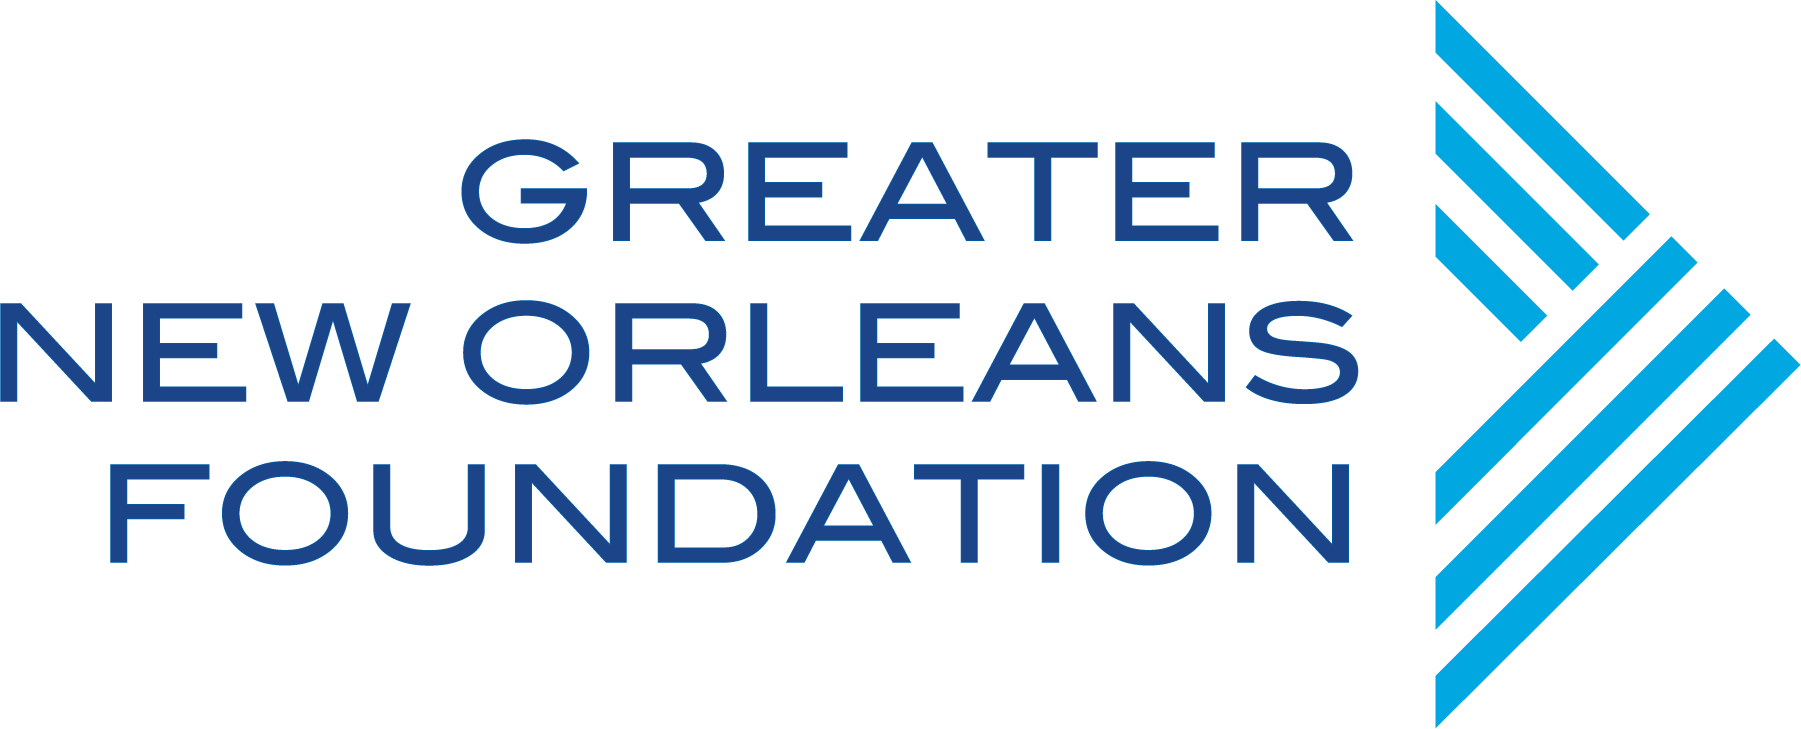 the Greater New Orleans Foundation